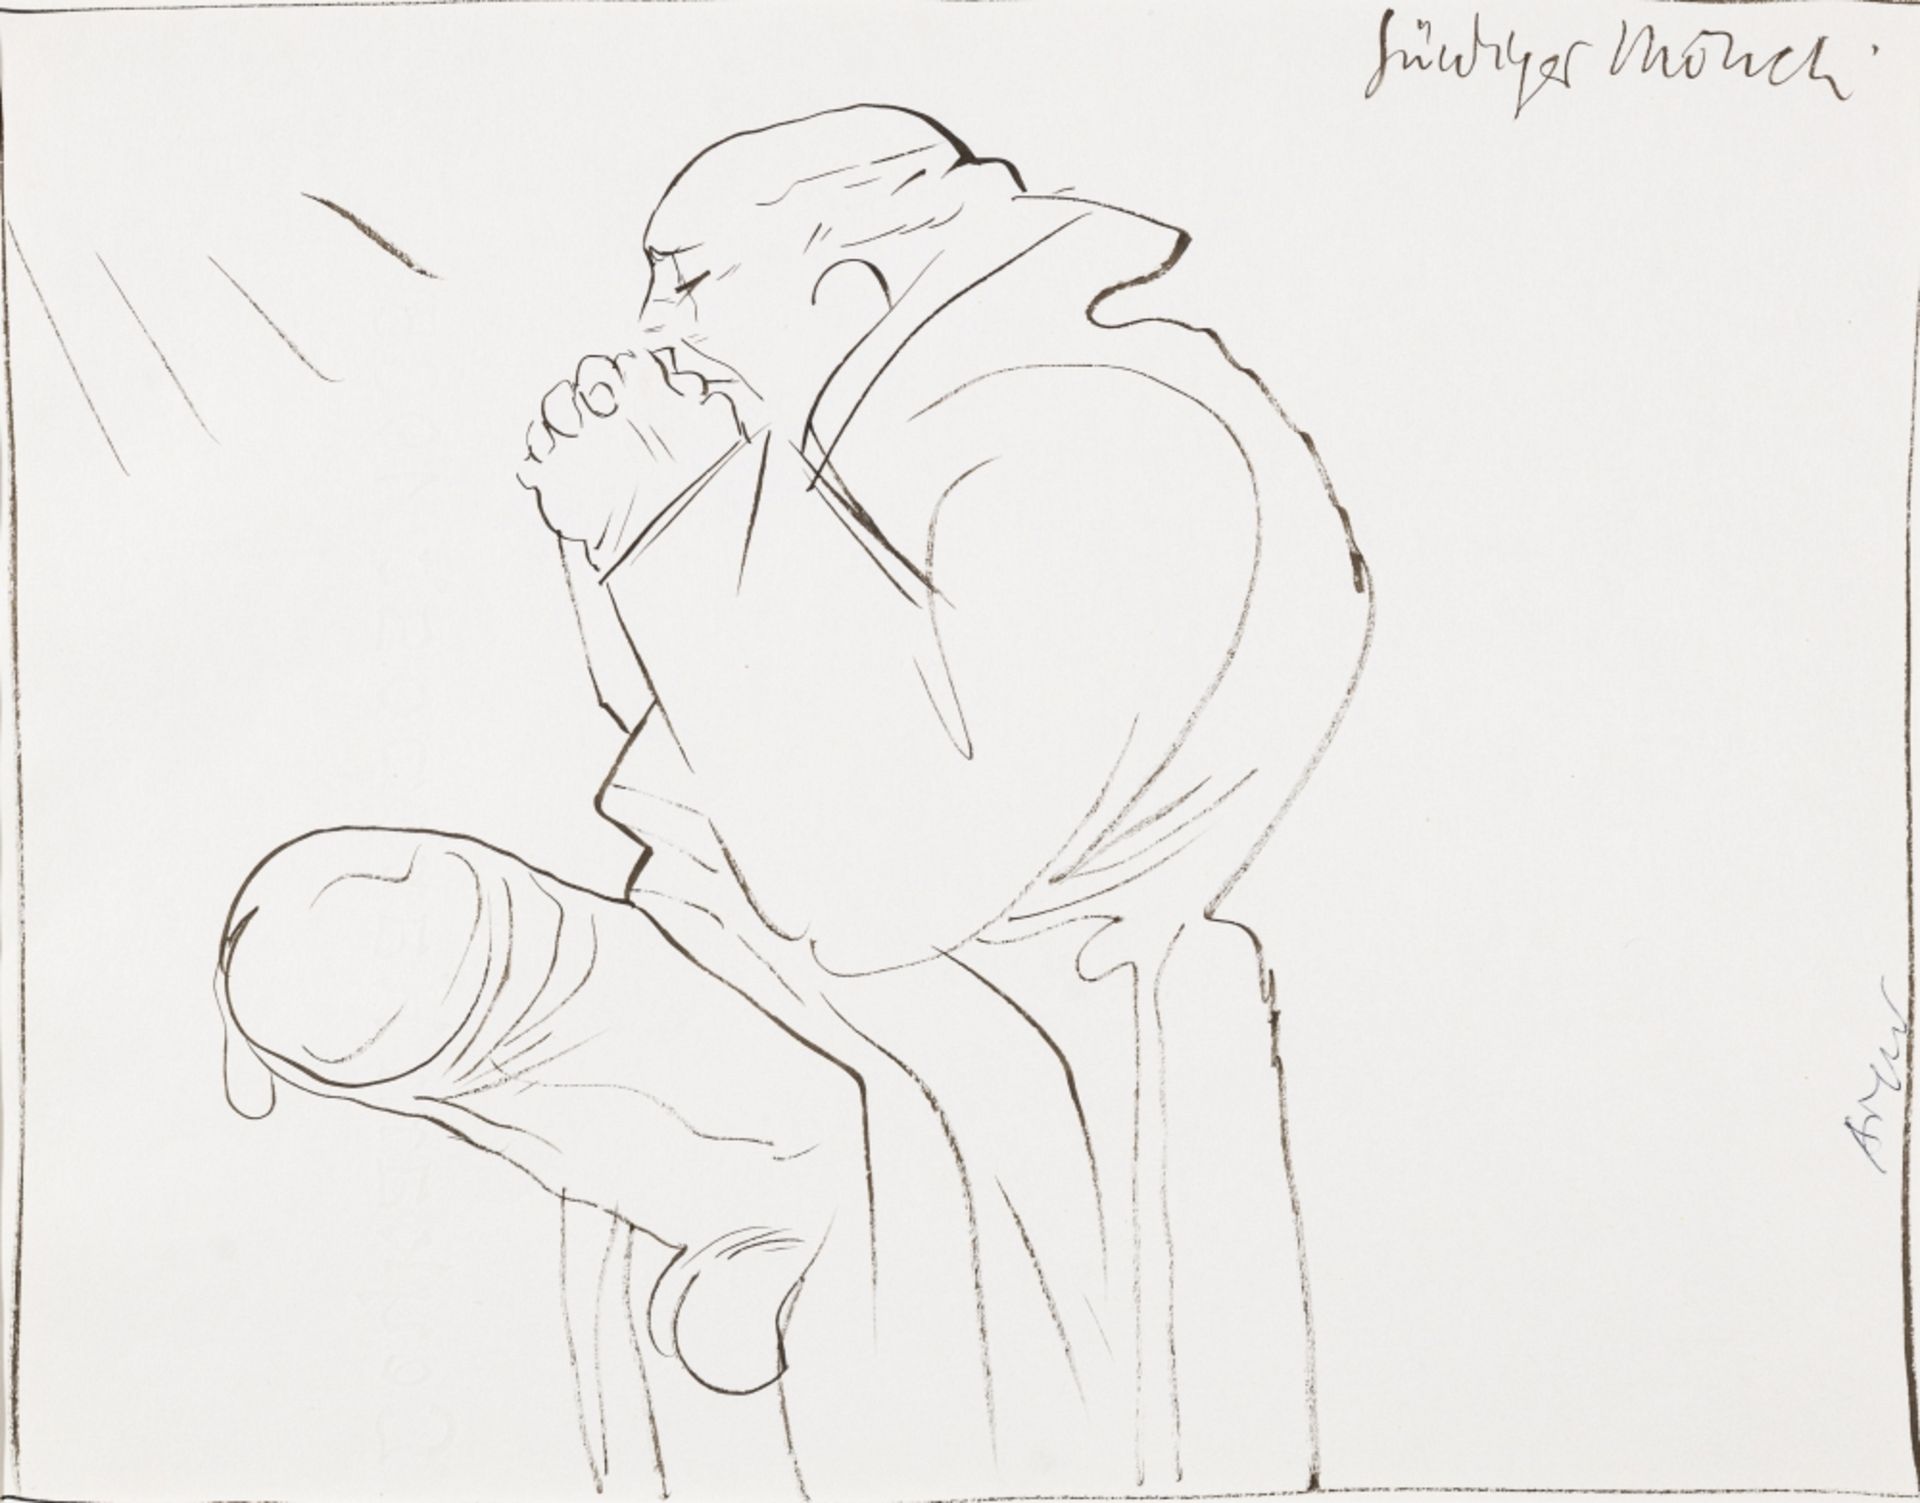 Aigner, Fritz (1930 - 2005) Sinful Monk Ink Brush Drawing Signed on the right, titled upper right